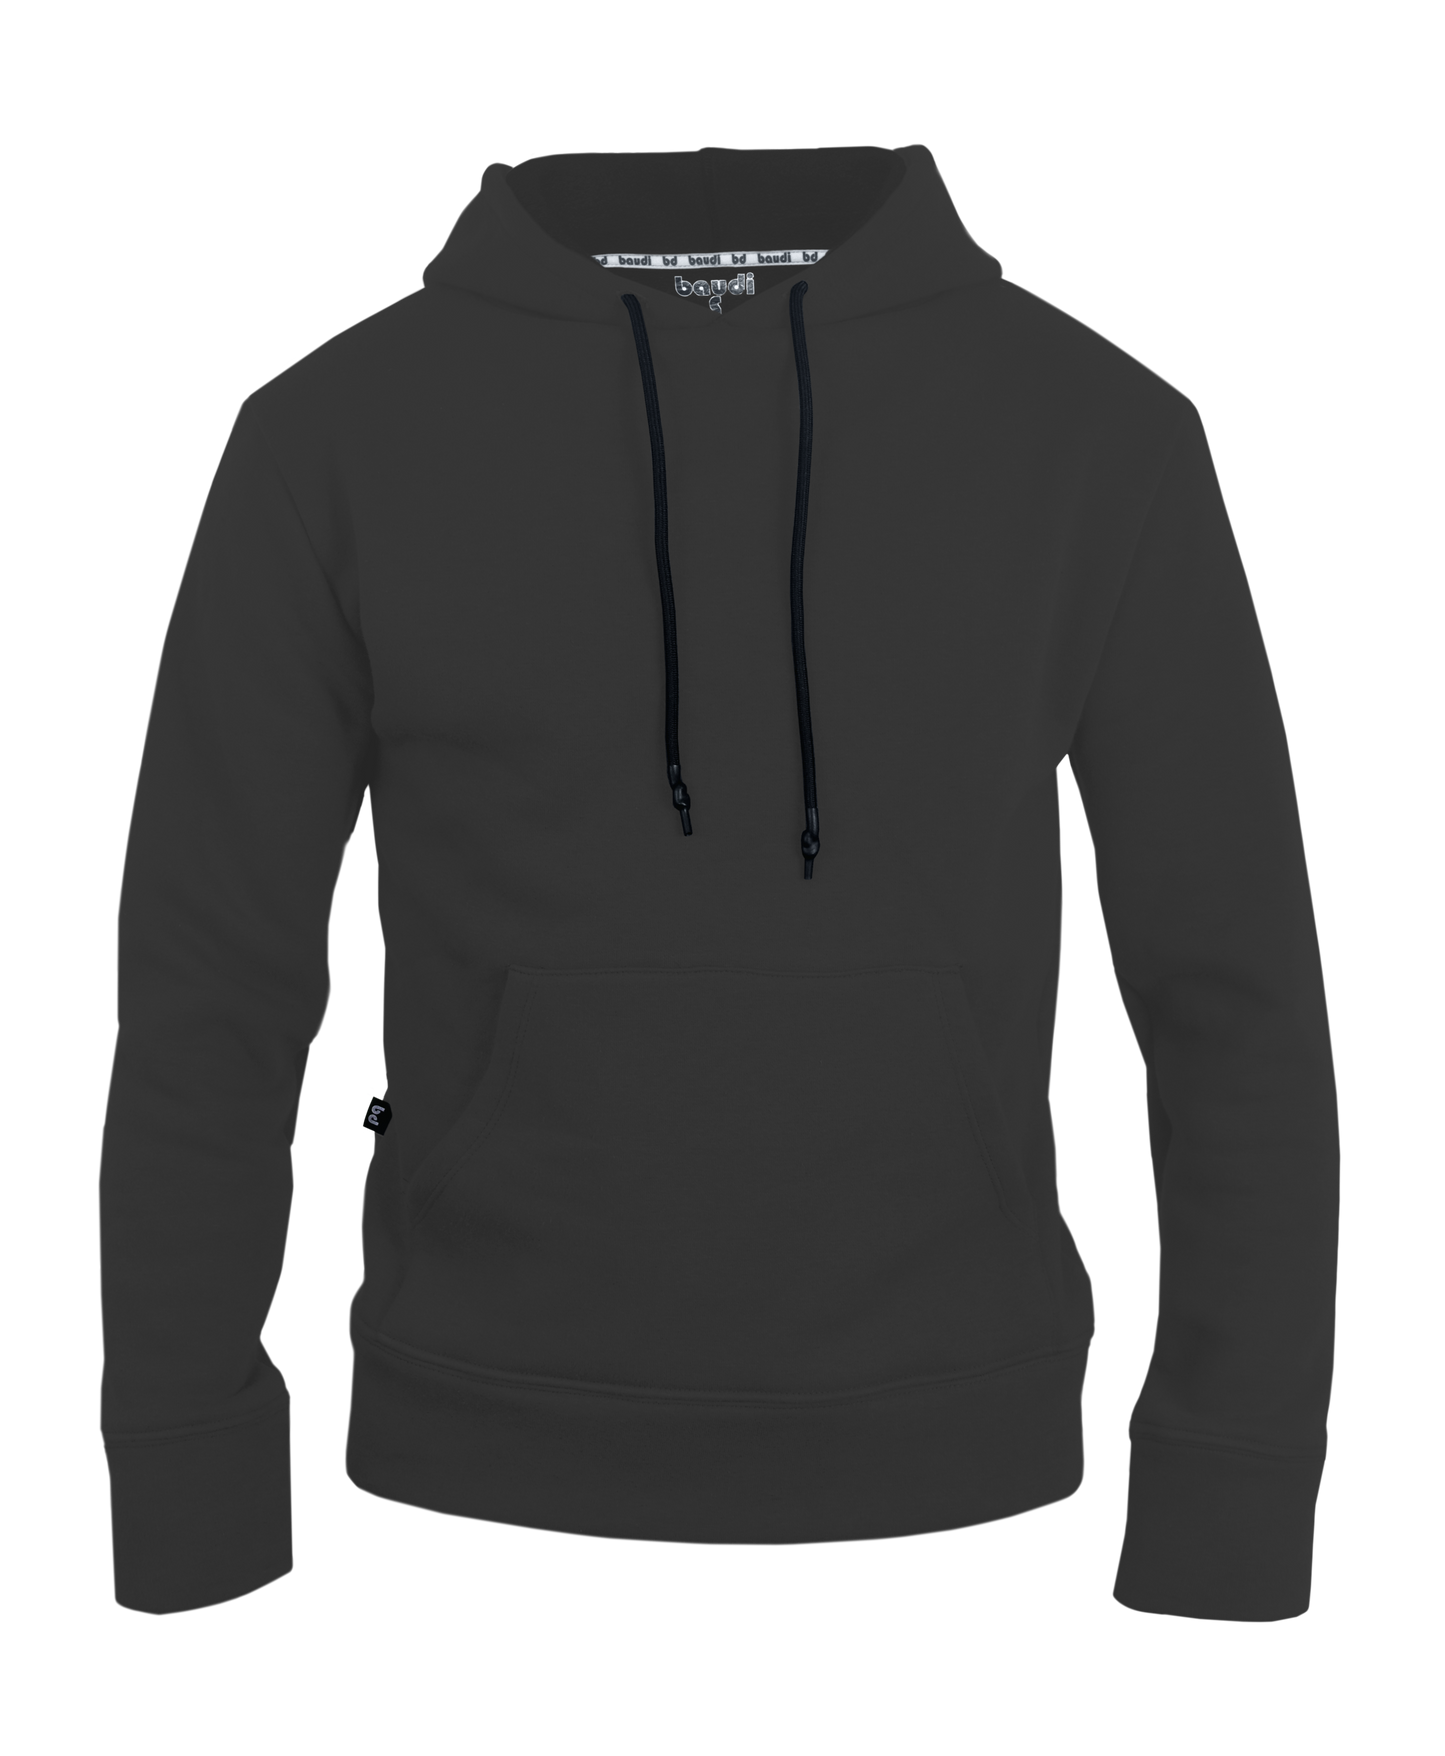 Hoodie lifestyle GRIS OSCURO